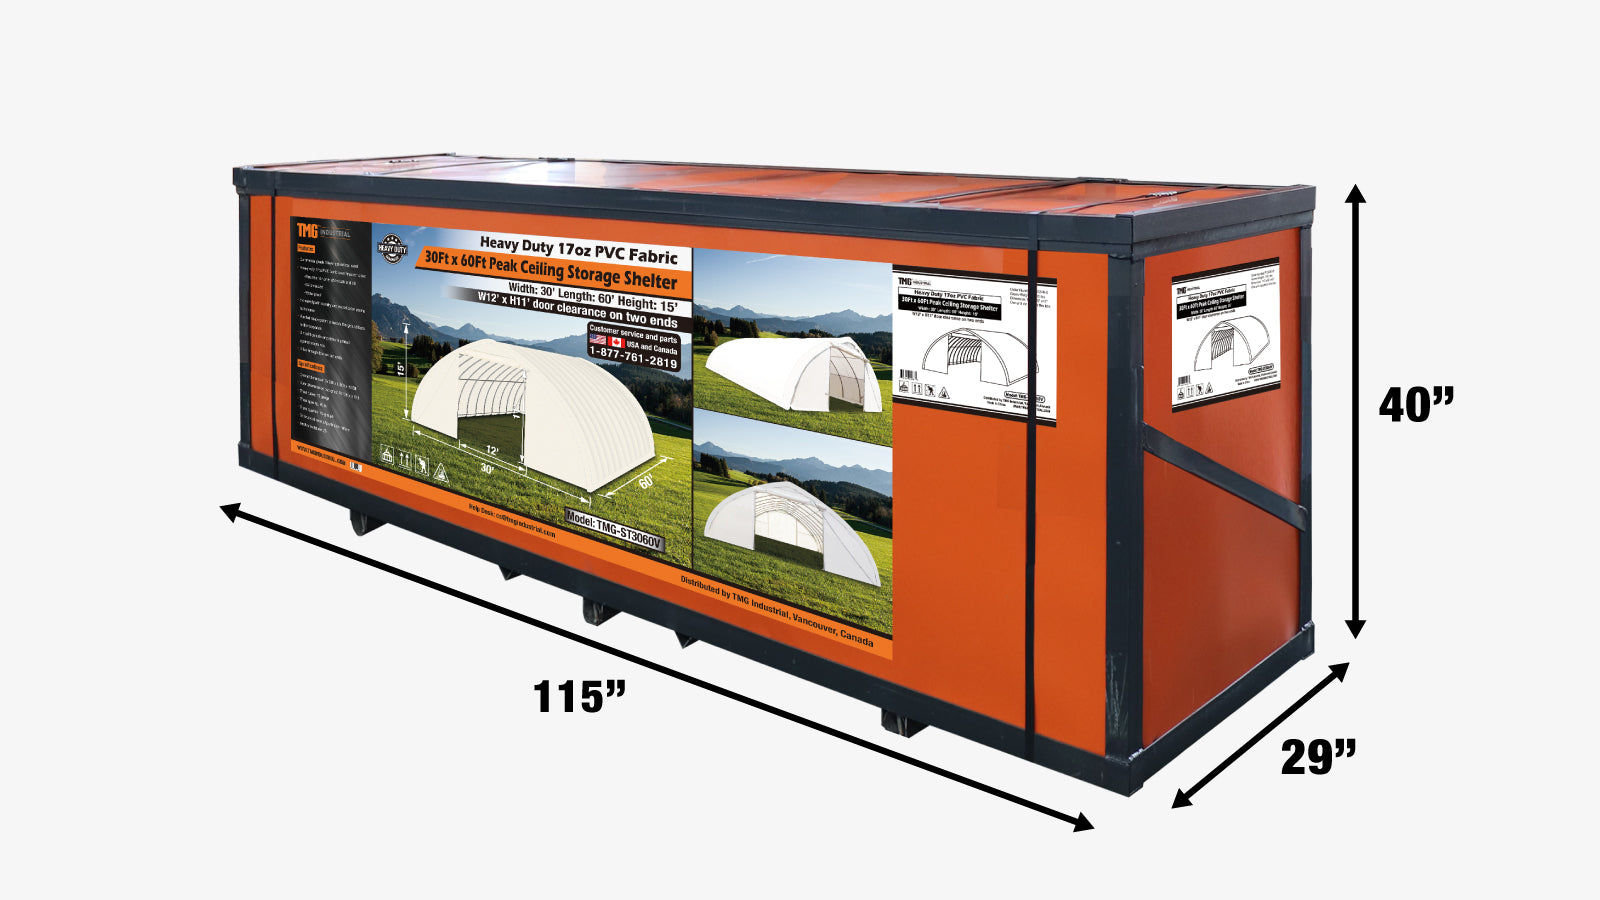 TMG Industrial 30' x 60' Peak Ceiling Storage Shelter with Heavy Duty 17 oz PVC Cover & Drive Through Doors, TMG-ST3060V-shipping-info-image